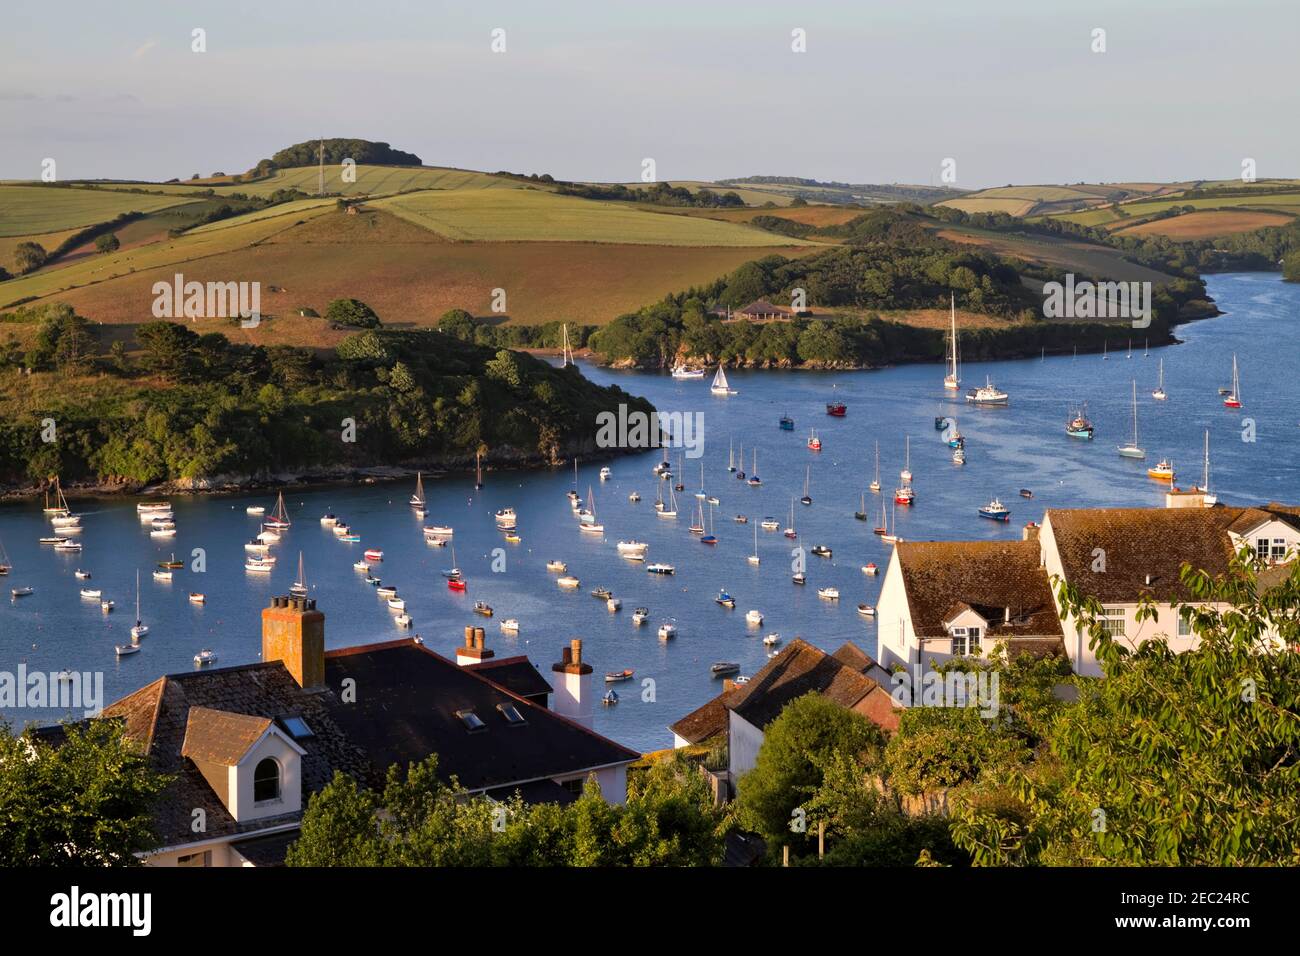 Salcombe Estuary. More properly described as a ria, a tidal inlet with no freshwater flowing into it. Stock Photo